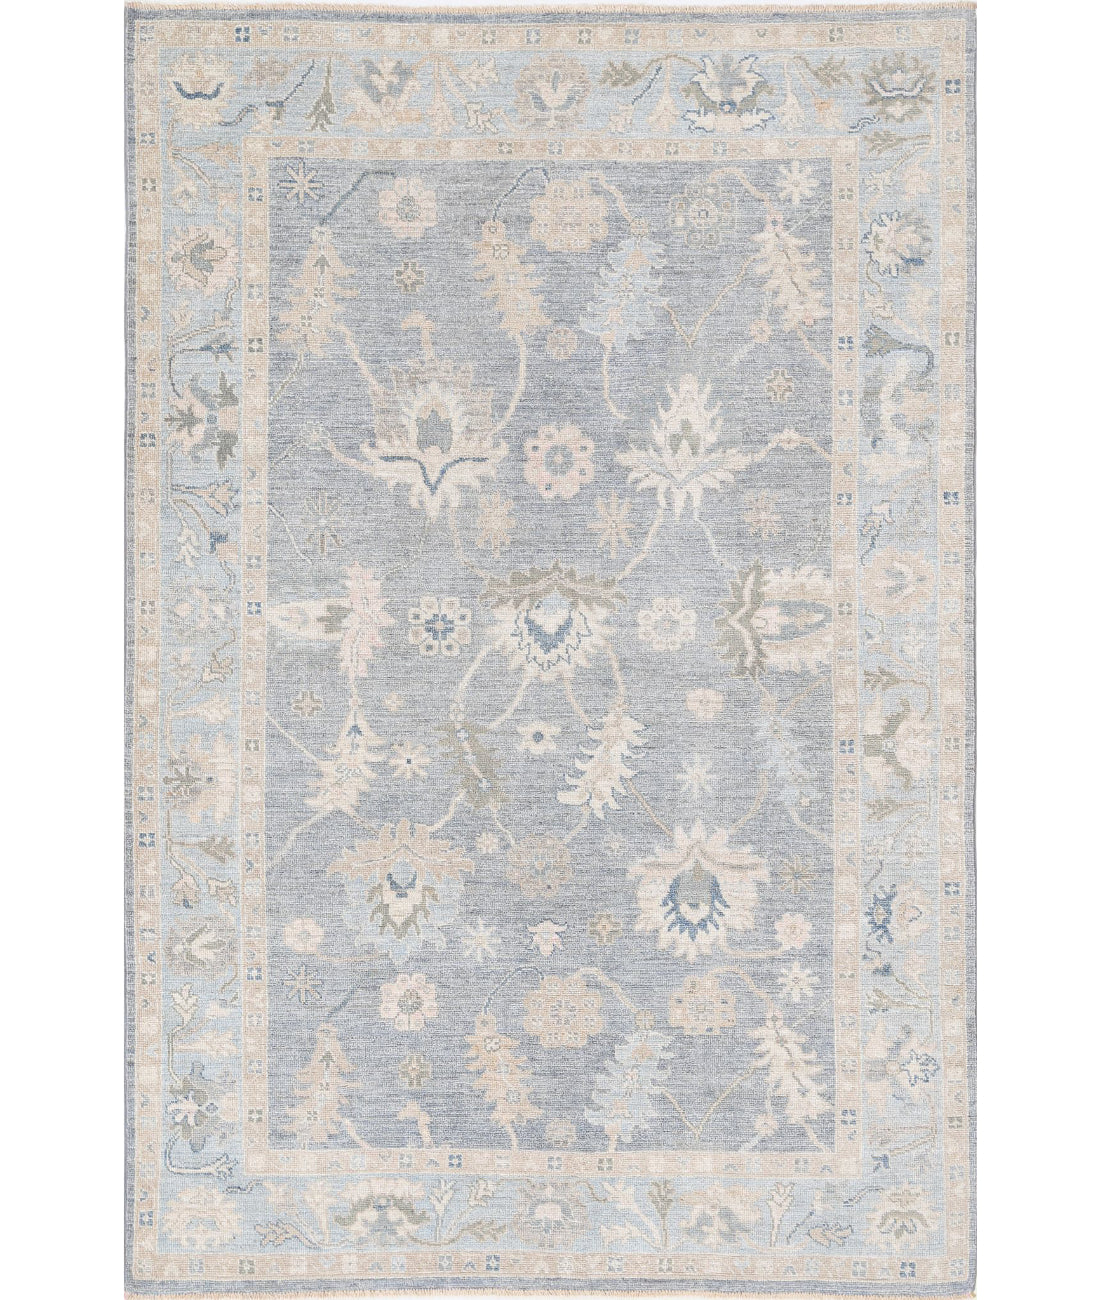 Hand Knotted Oushak Wool Rug - 5'10'' x 9'0'' 5'10'' x 9'0'' (175 X 270) / Grey / Blue